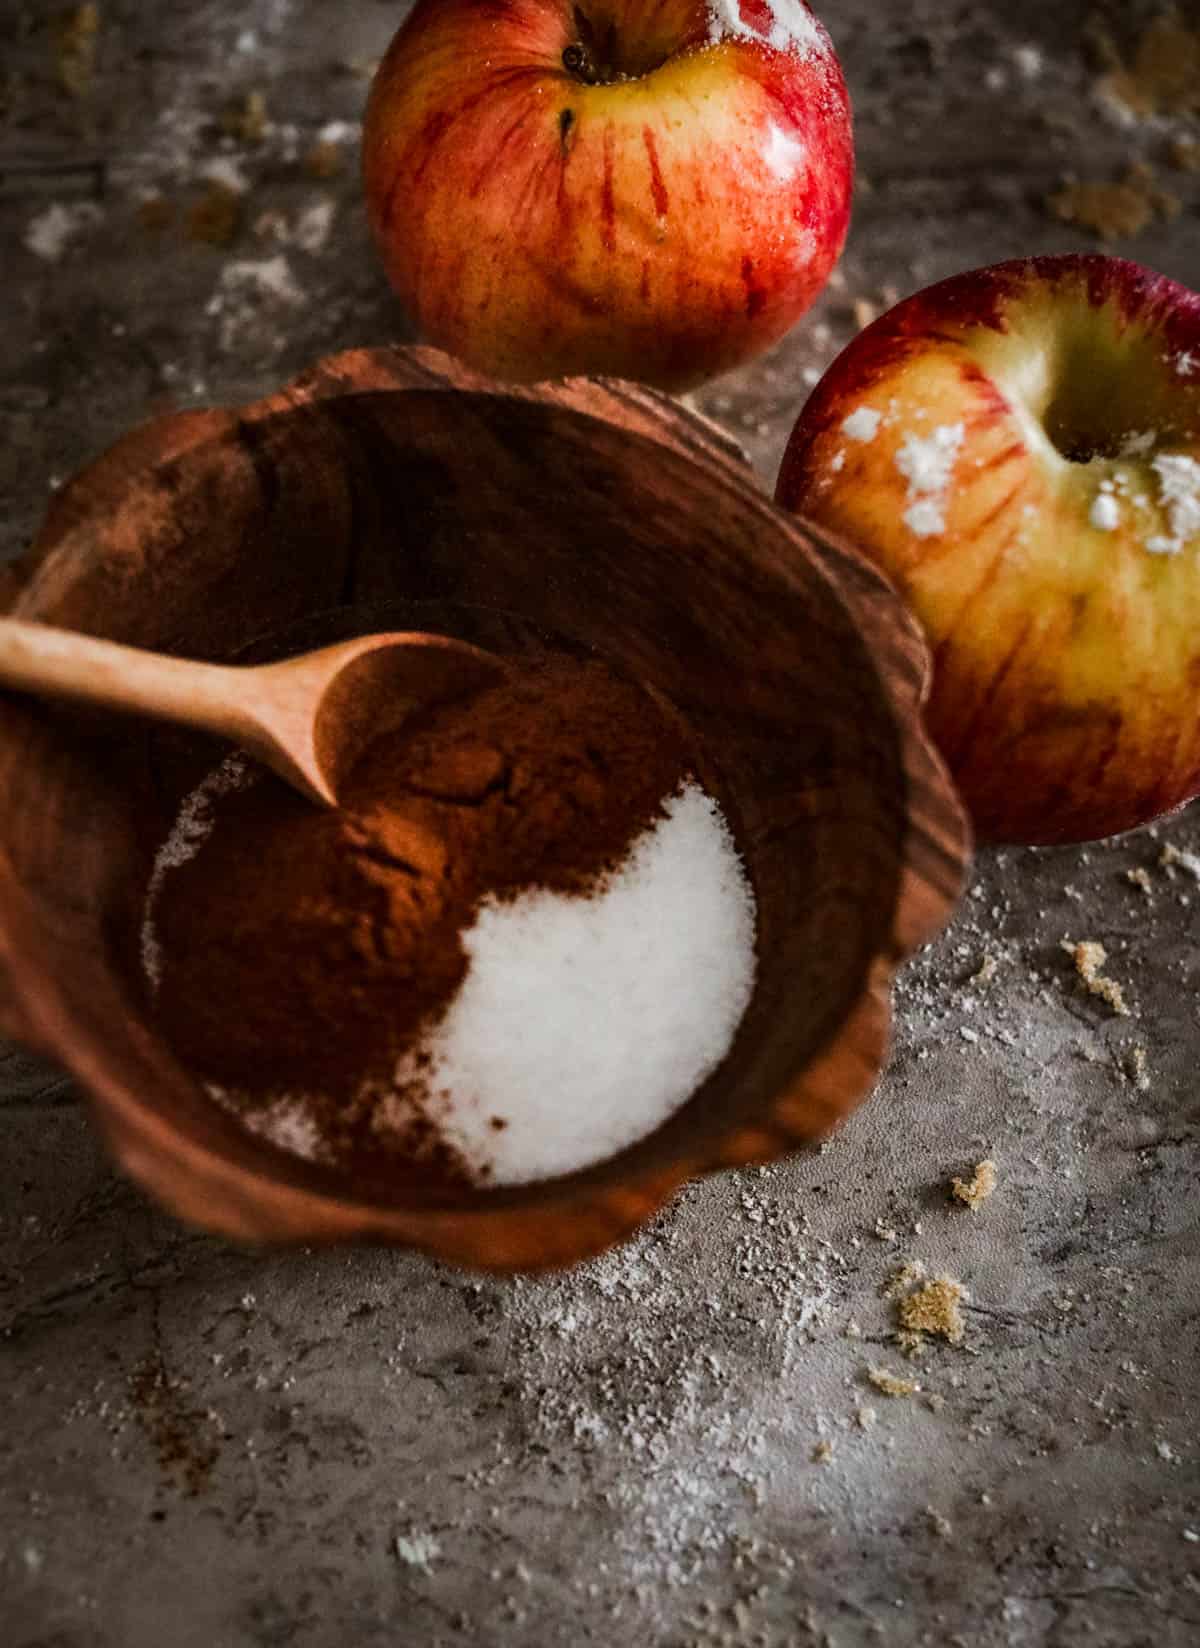 Apples and sugar are used to make a delicious apple cider donut cake served in a wooden bowl.